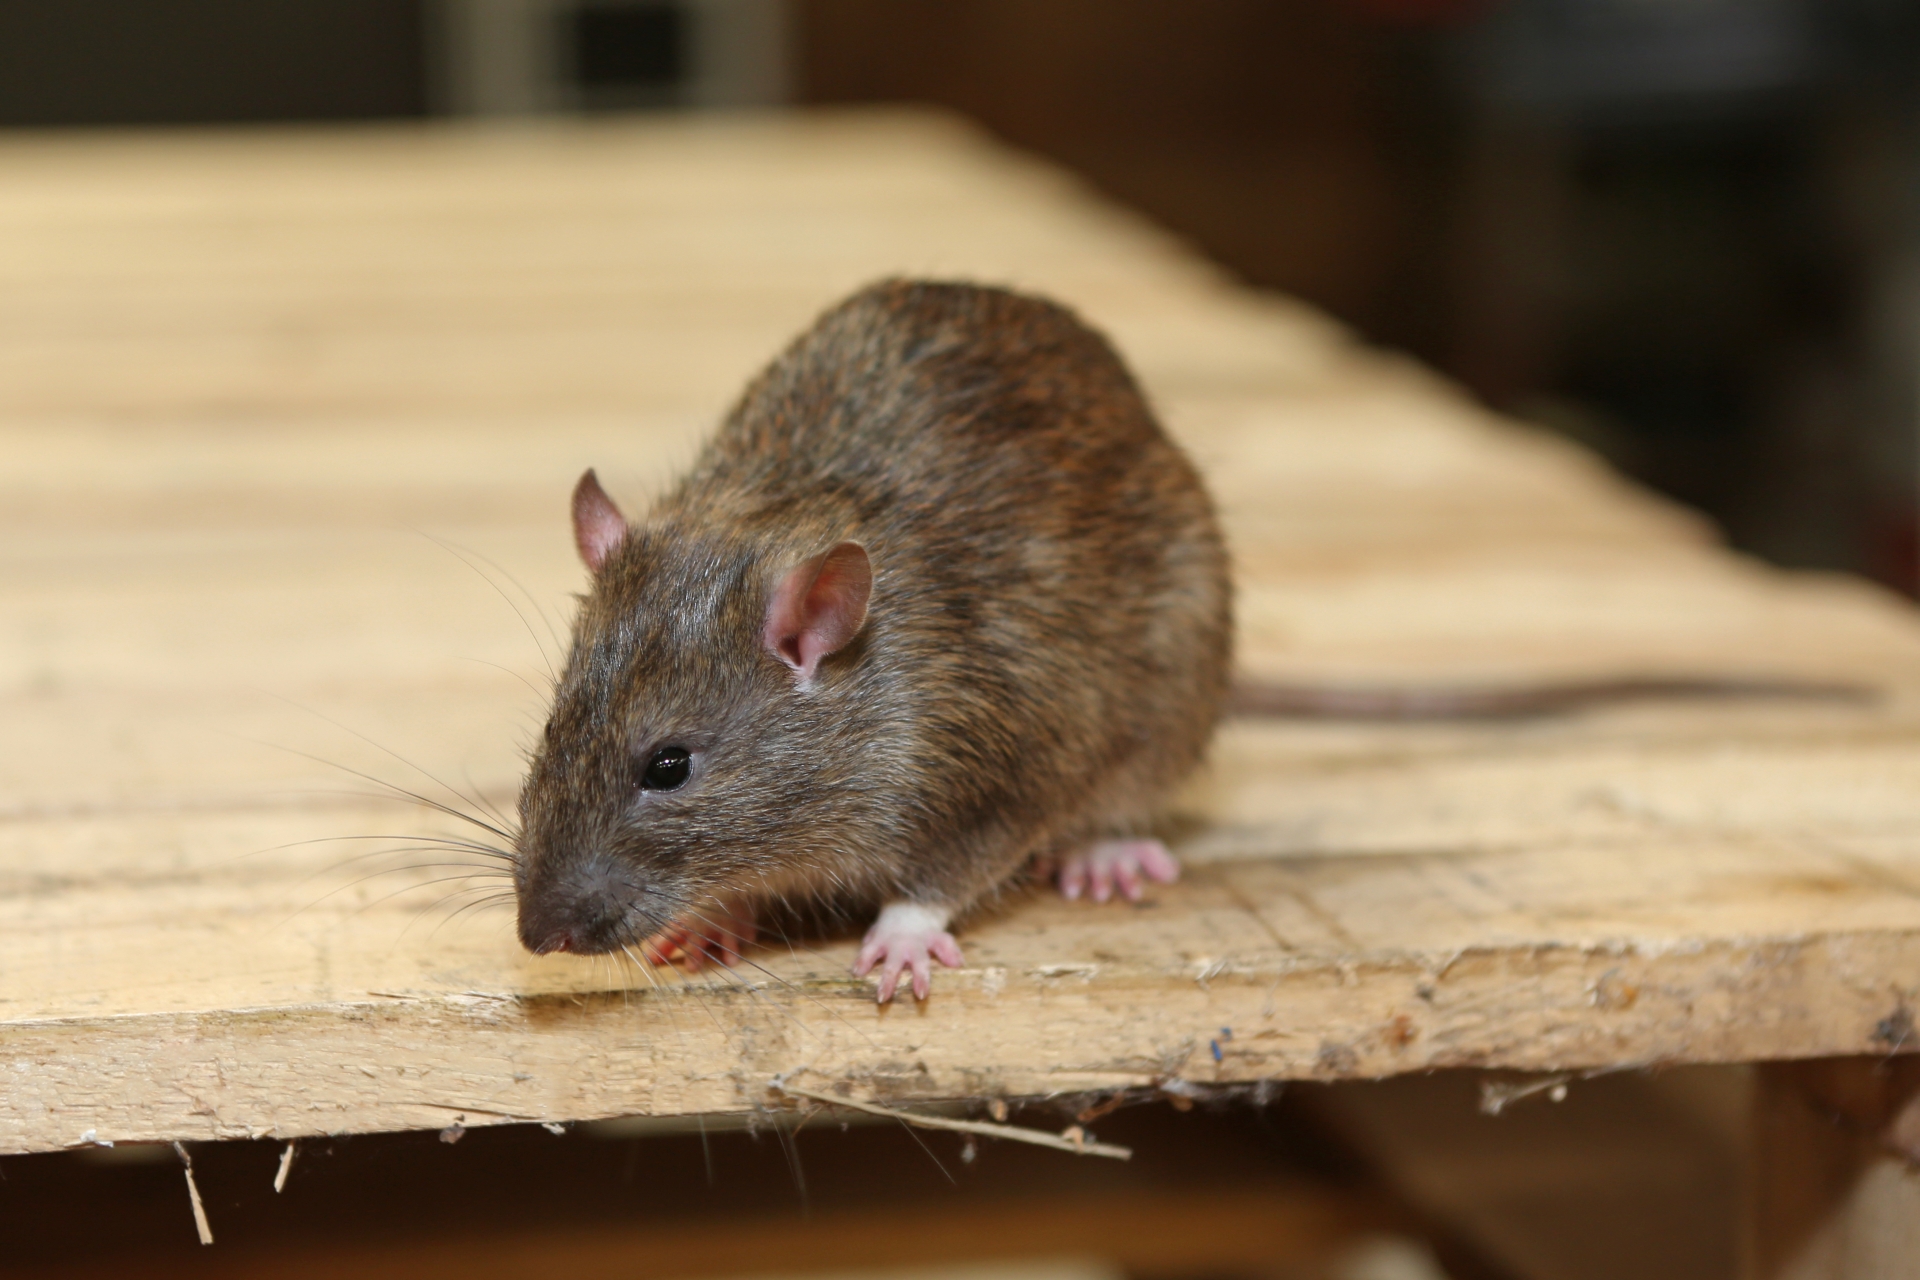 Rat Control, Pest Control in Camberwell, SE5. Call Now 020 8166 9746